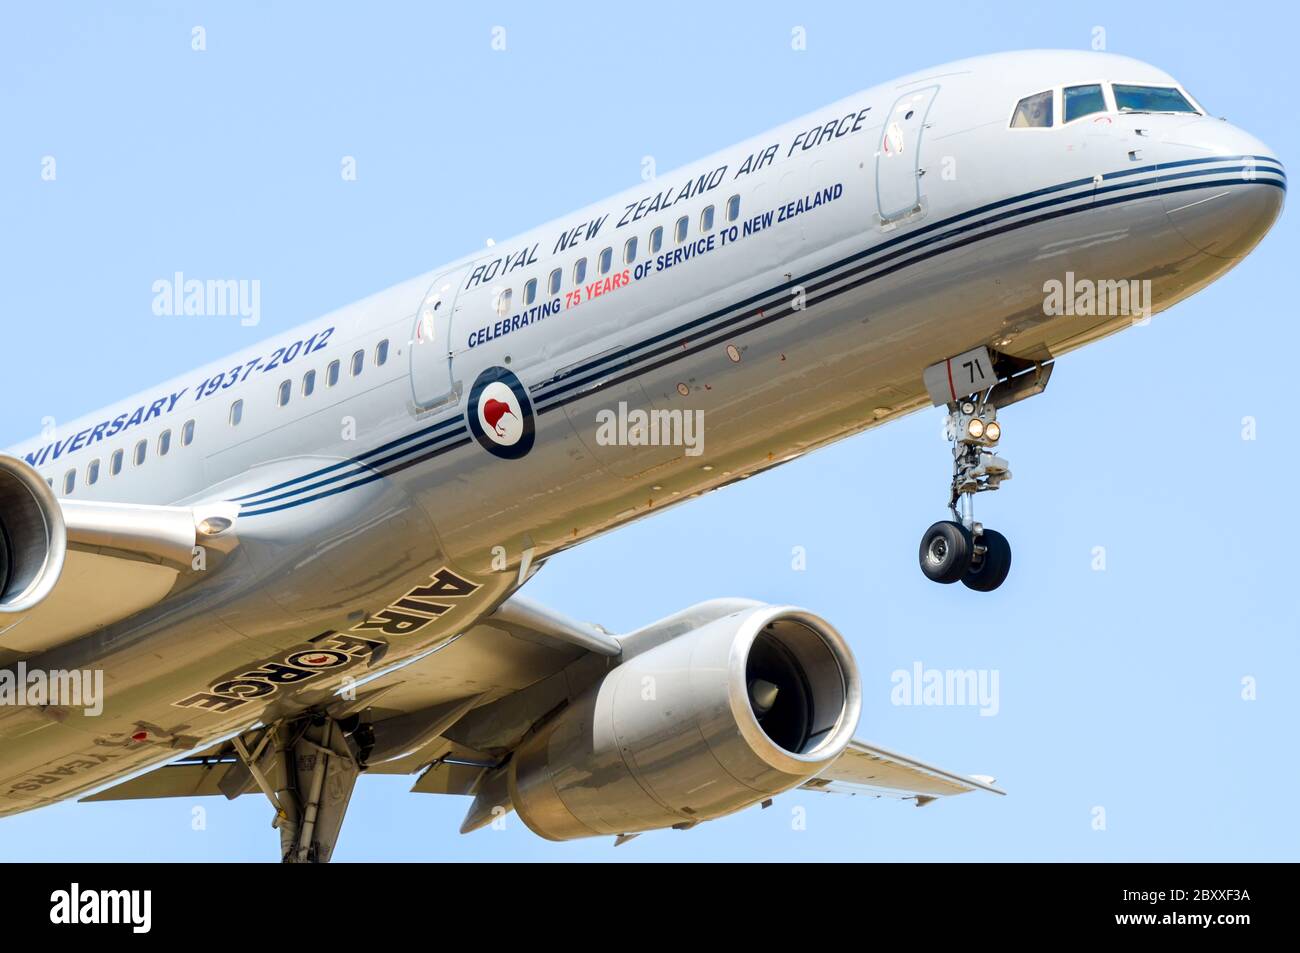 Royal New Zealand Air Force RNZAF Boeing 757 jet plane aircraft . Uses include transport for visiting VIPs and royalty. 75th anniversary paint scheme Stock Photo